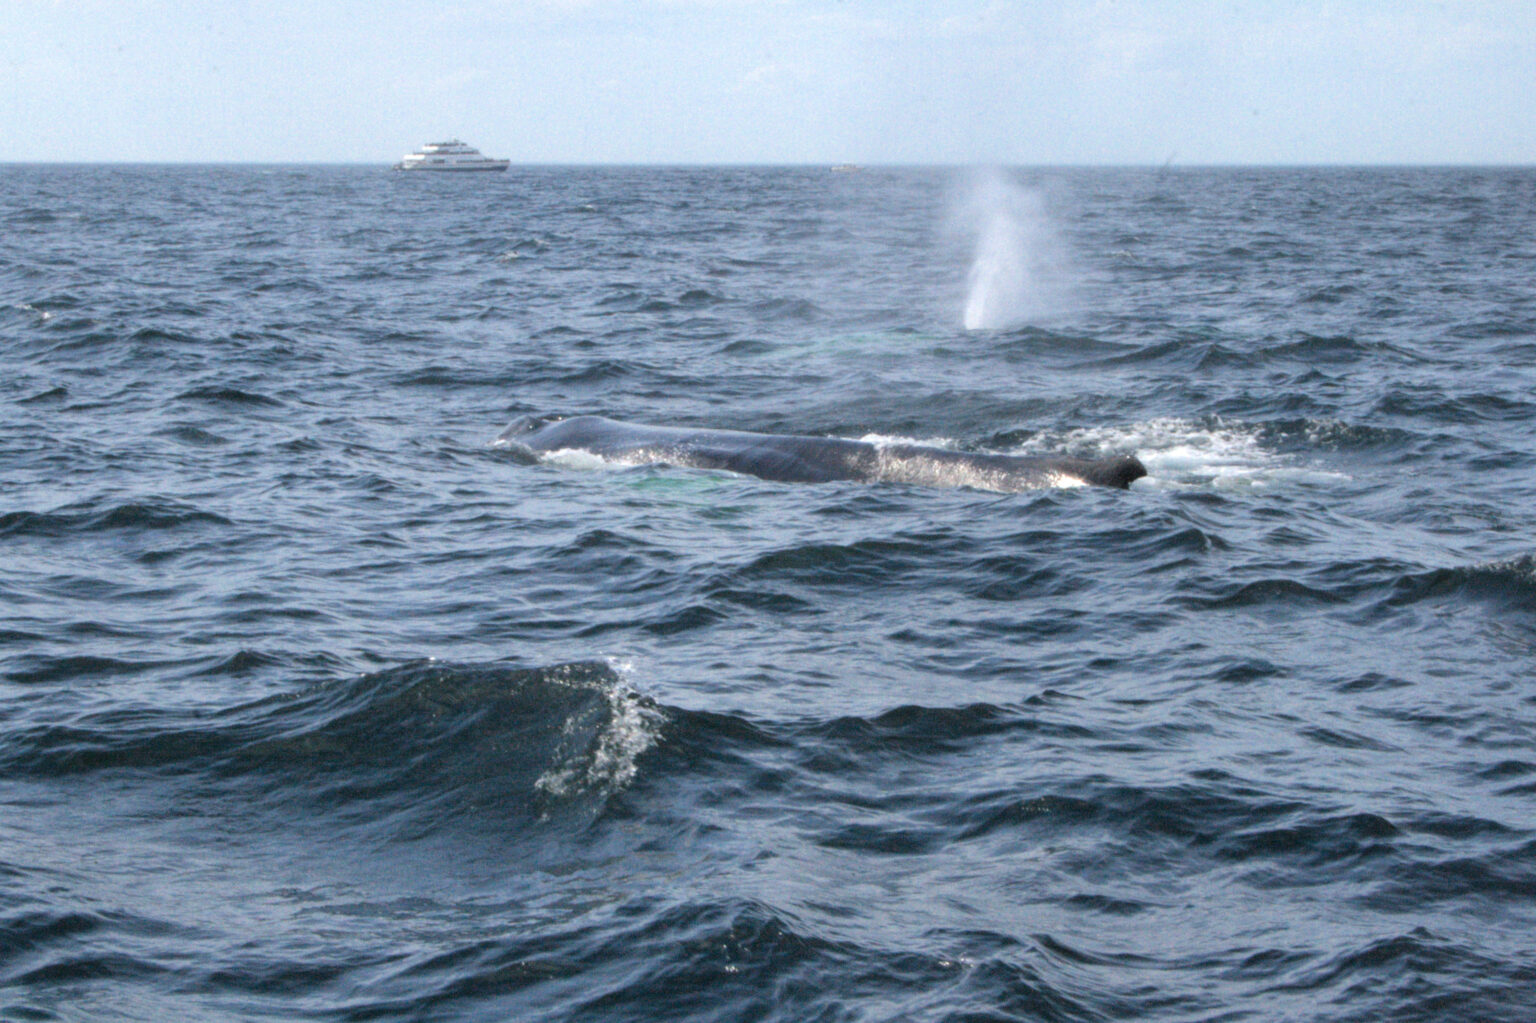 Whale Watching Adventure off Cape Ann | In The Olive Groves